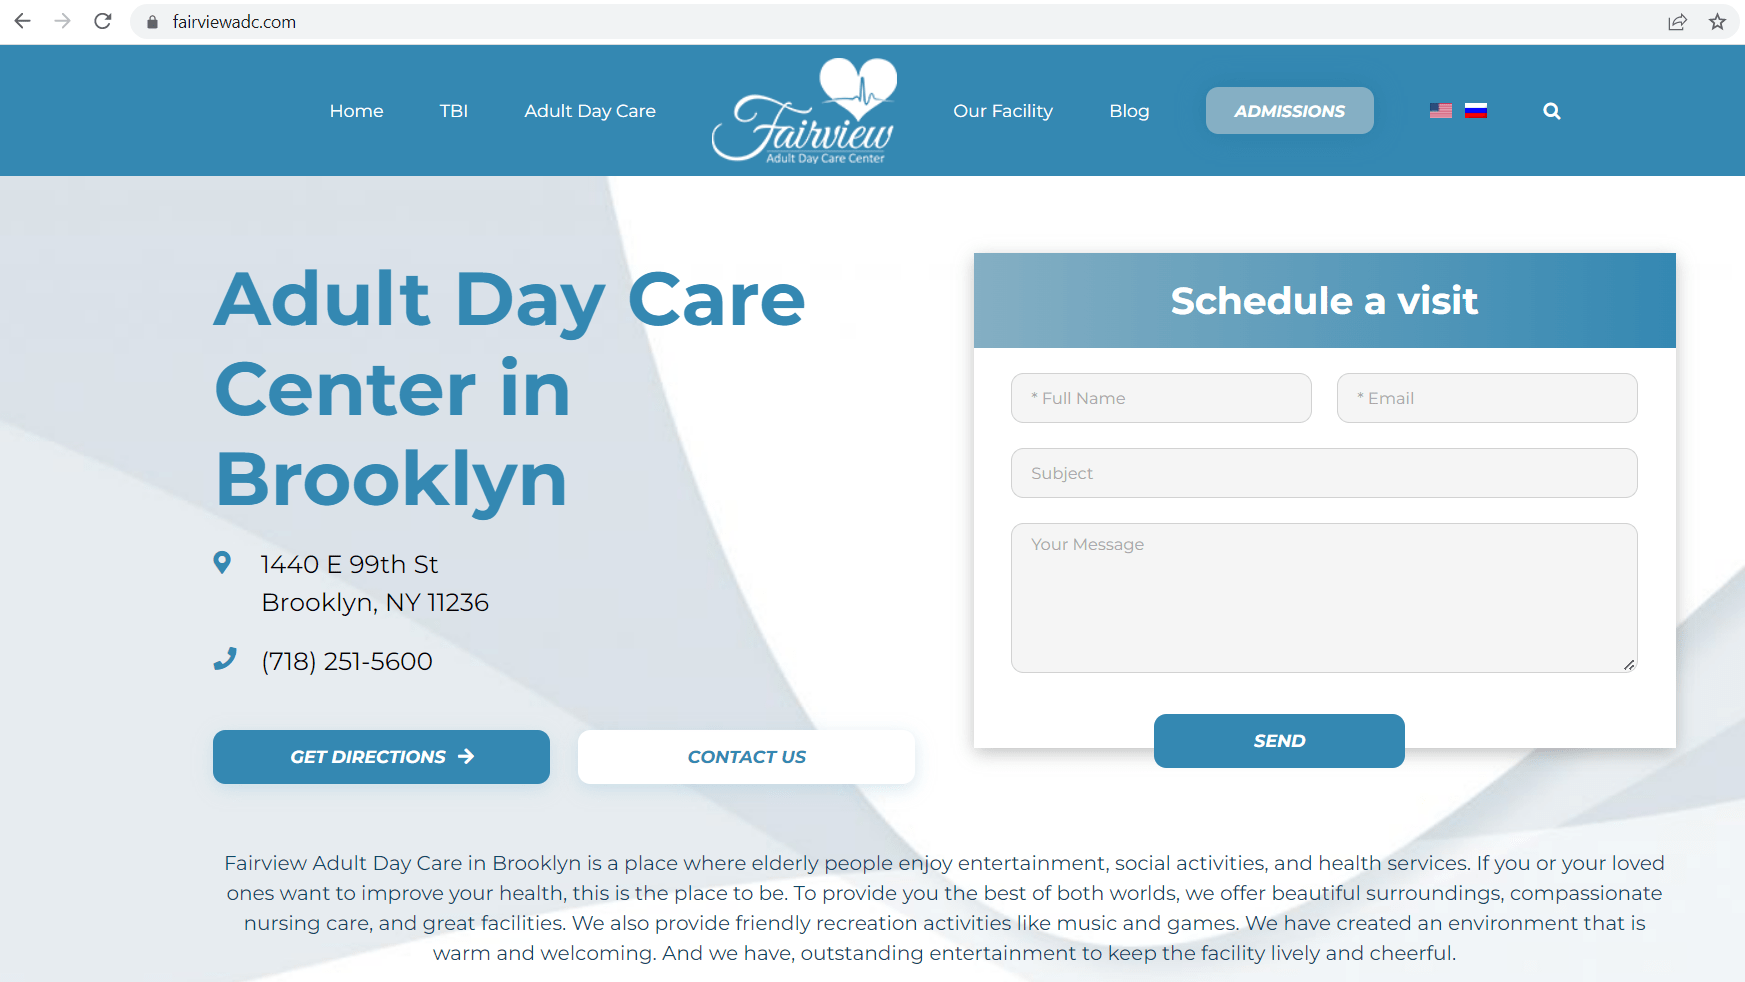 Fairview Adult Day Center Center - Brooklyn, NY